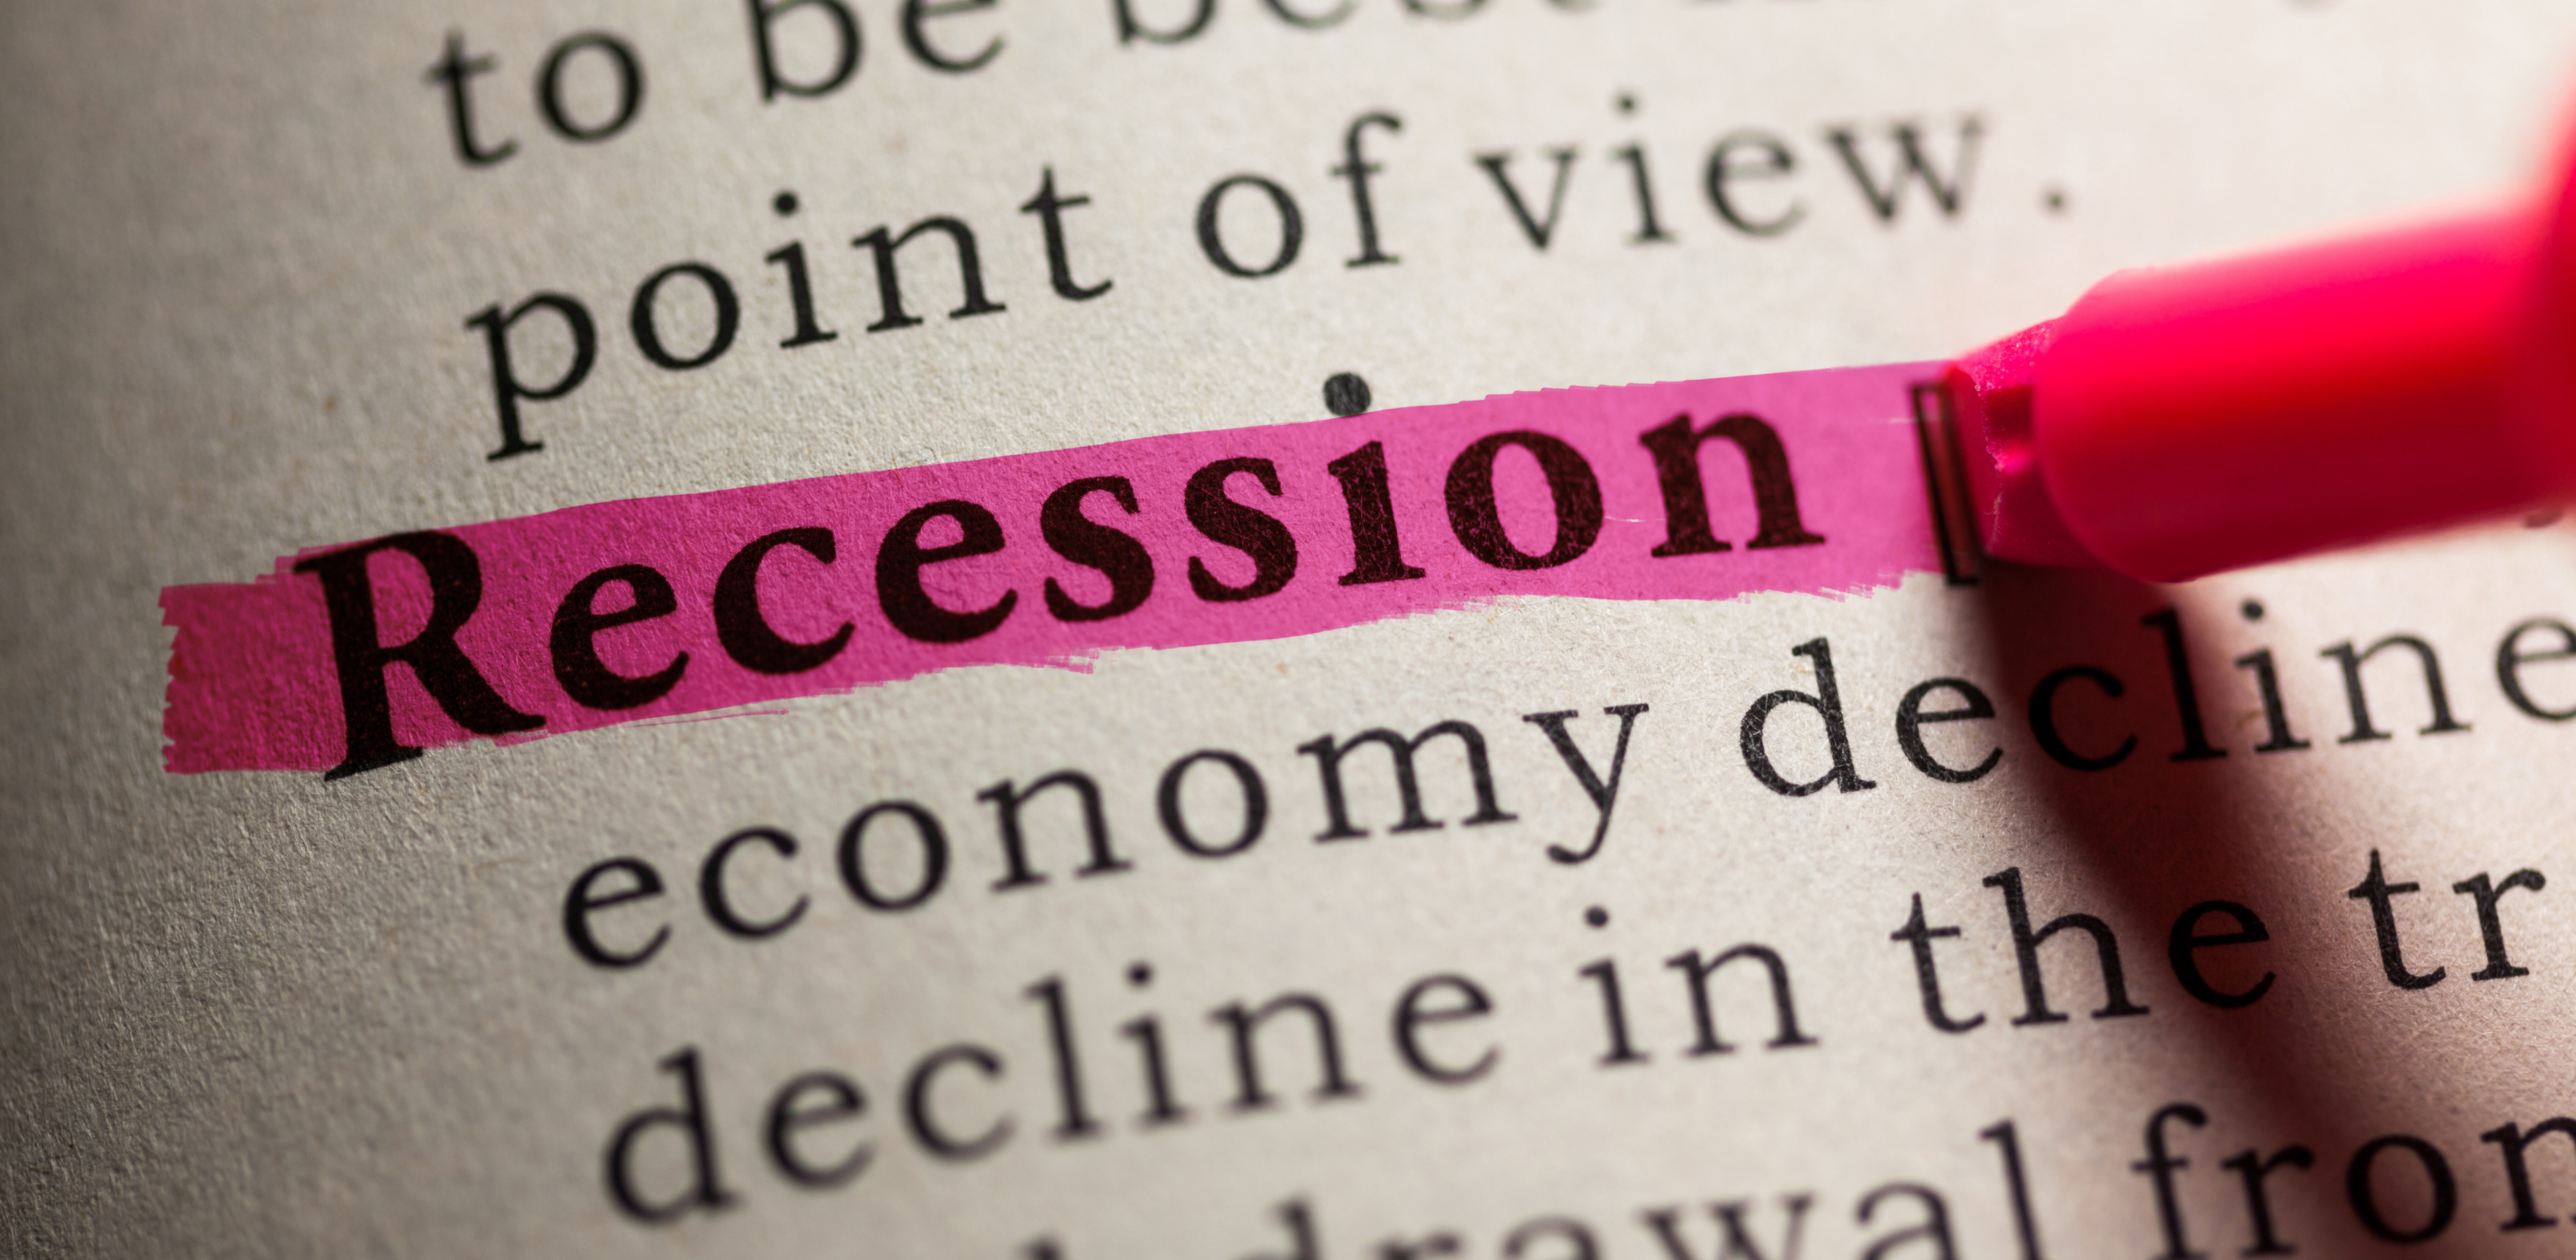 Another Recession? The reasons behind it